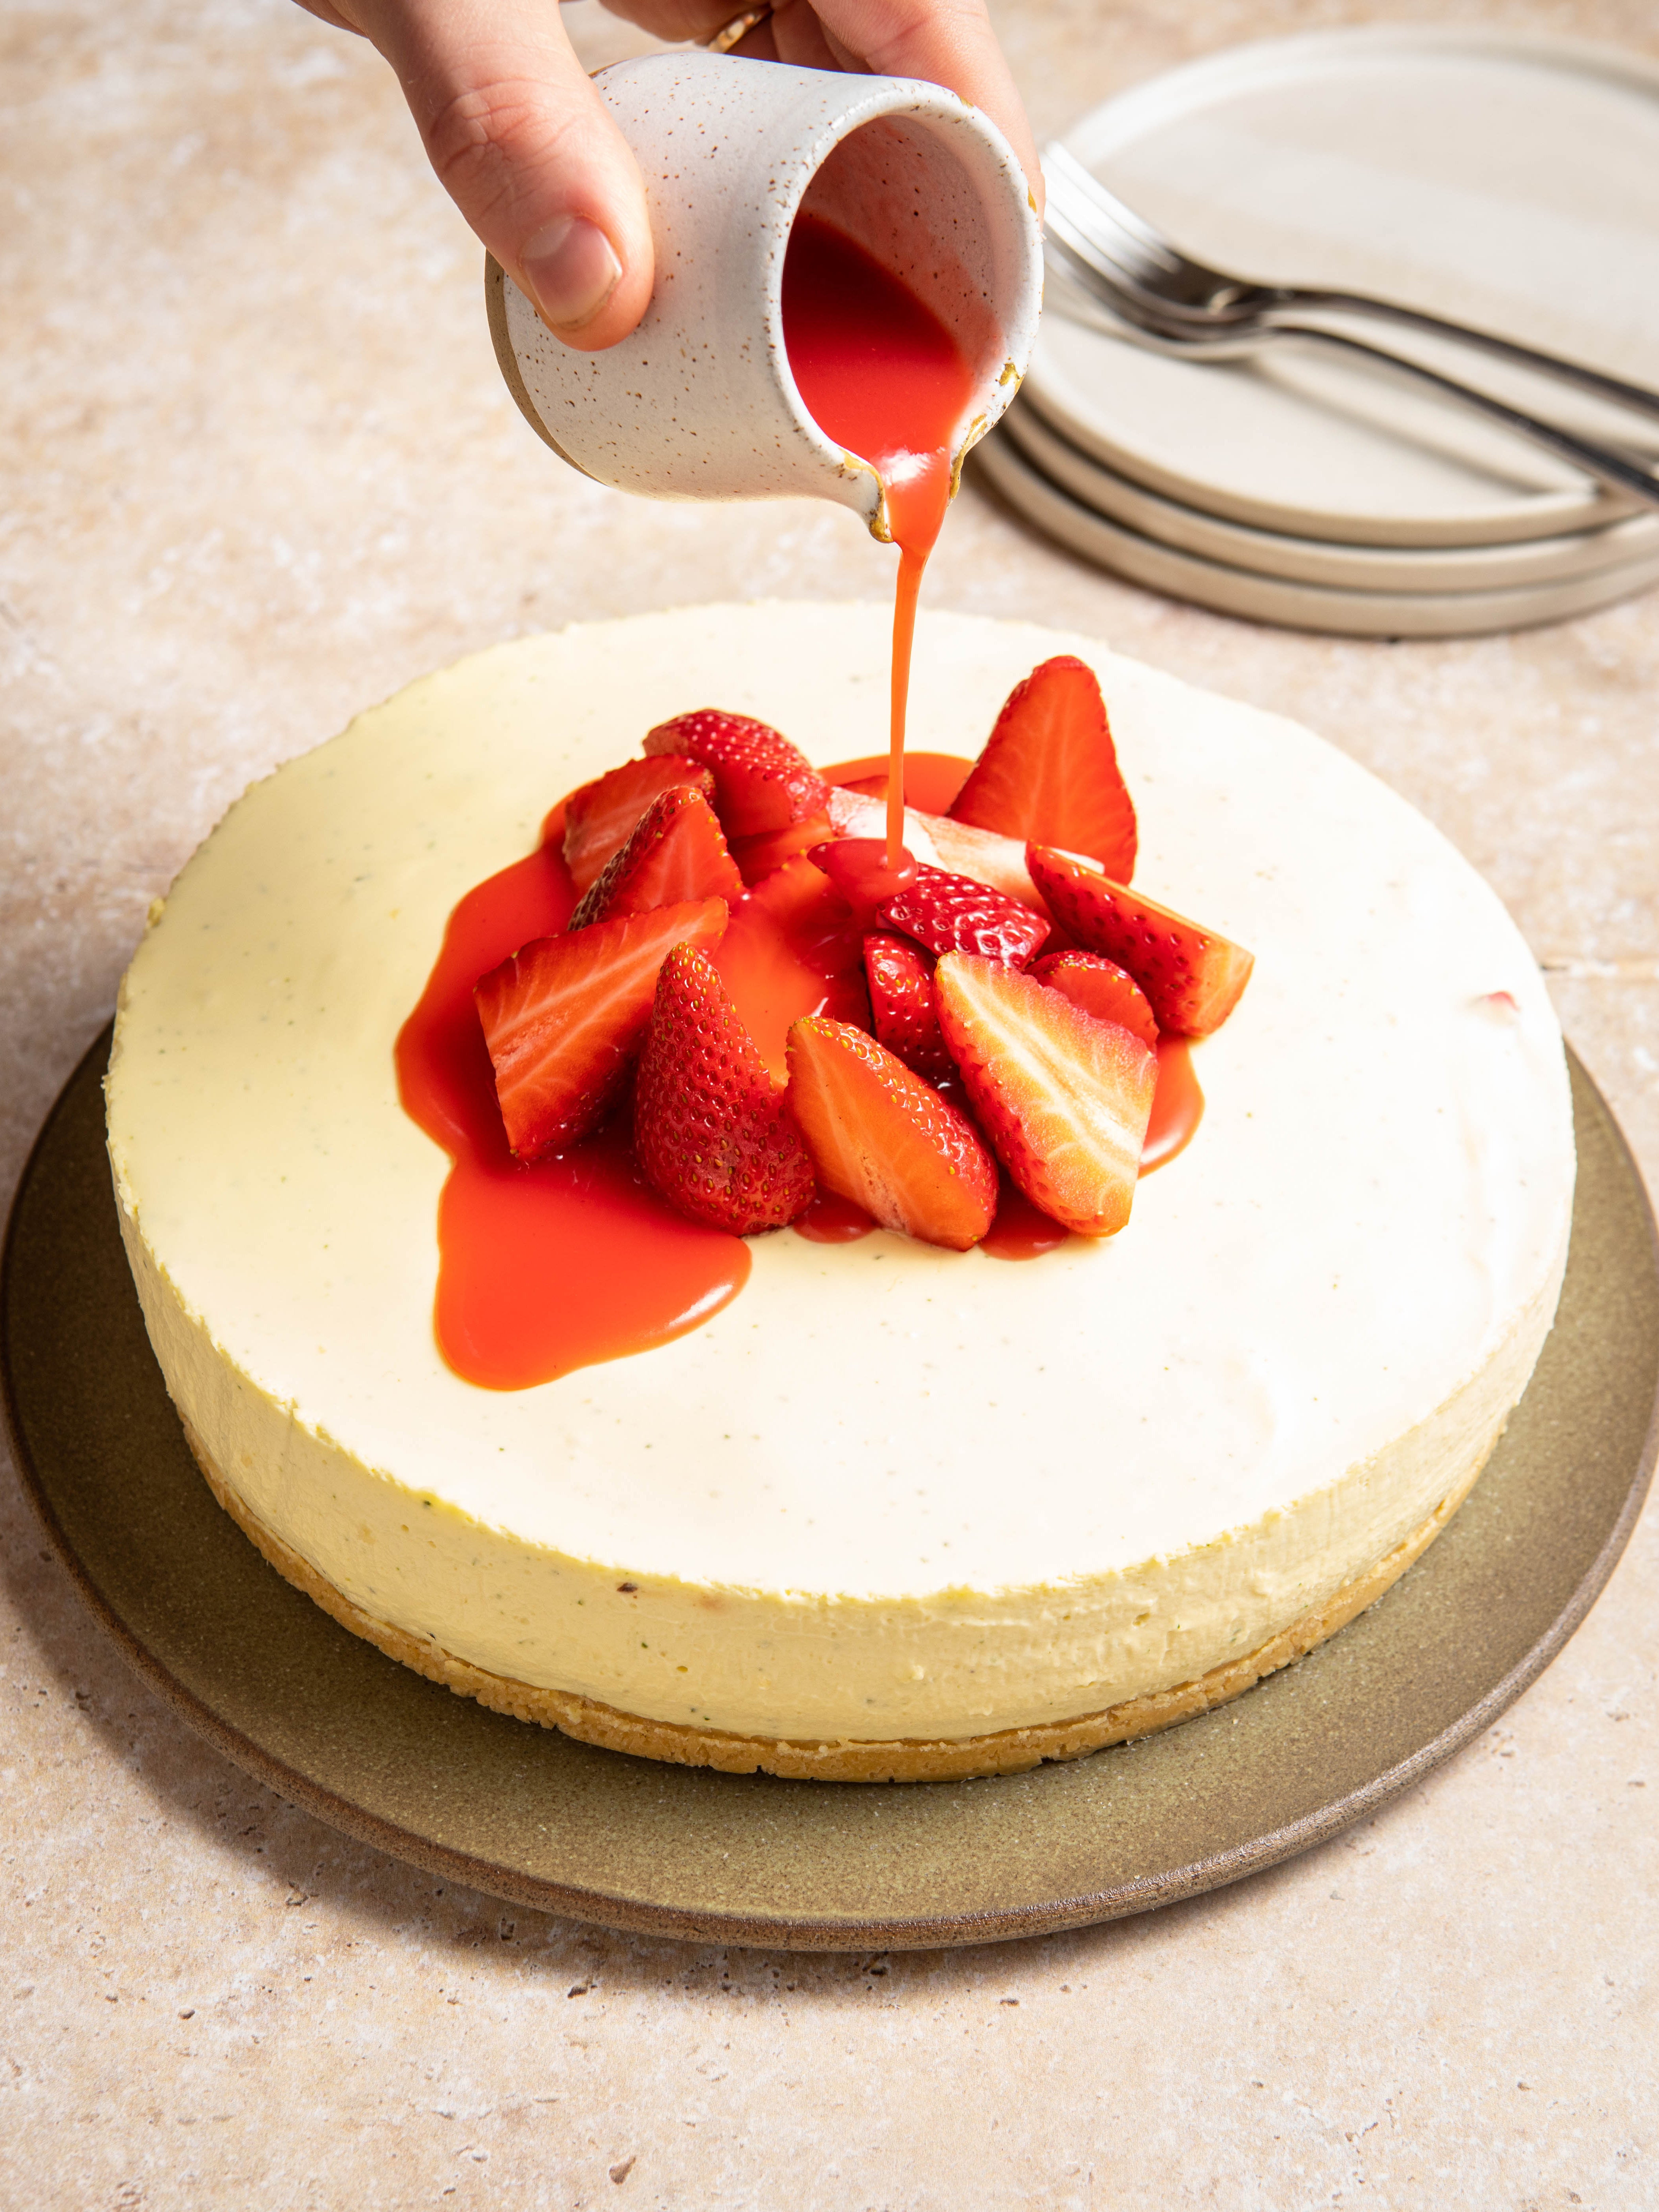 Tommy Banks’ strawberry and basil cheesecake features a no-bake shortbread base with a creamy basil-infused filling